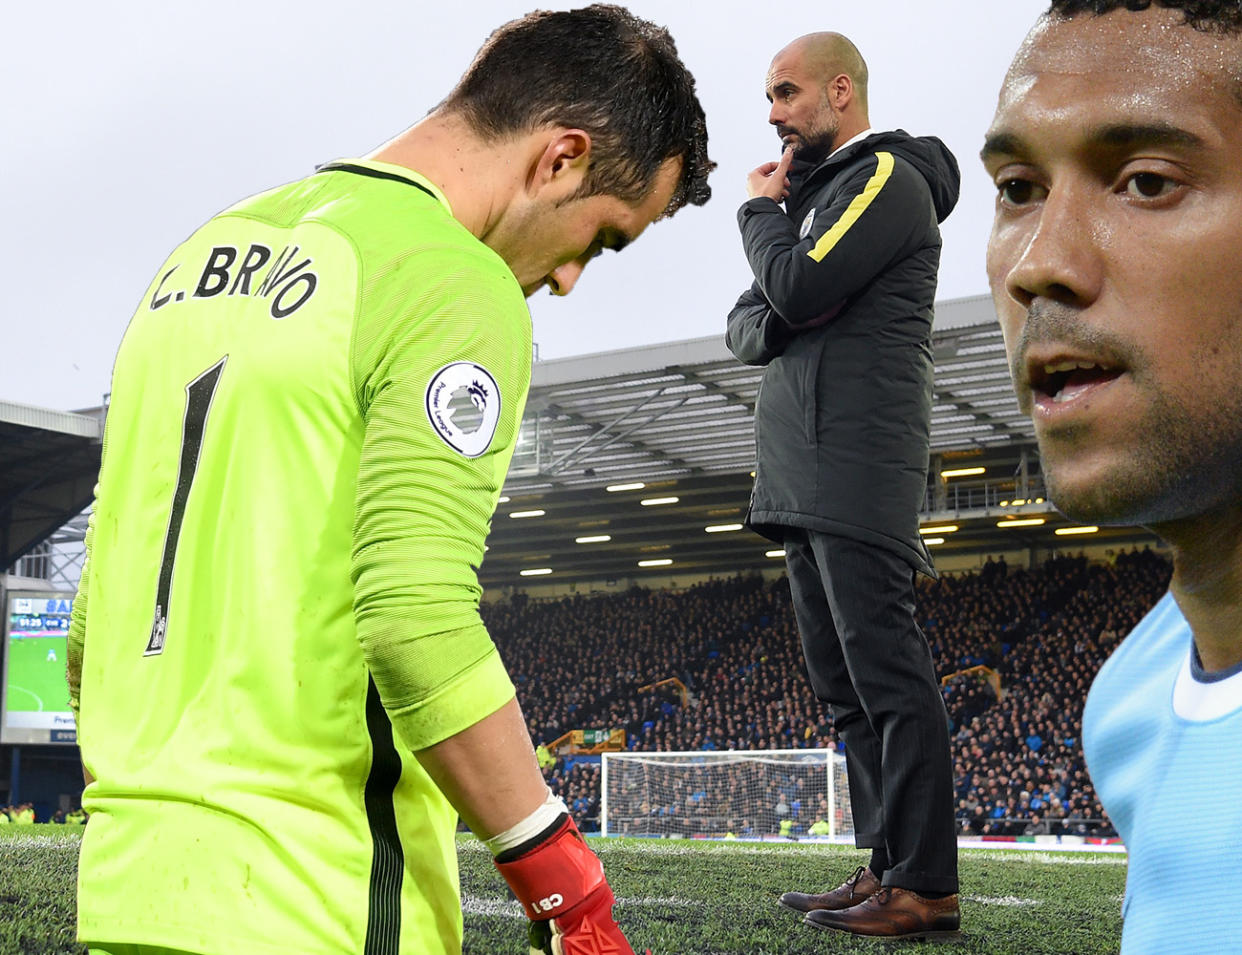 Pep Guardiola brought in Bravo and kept Clichy - why?